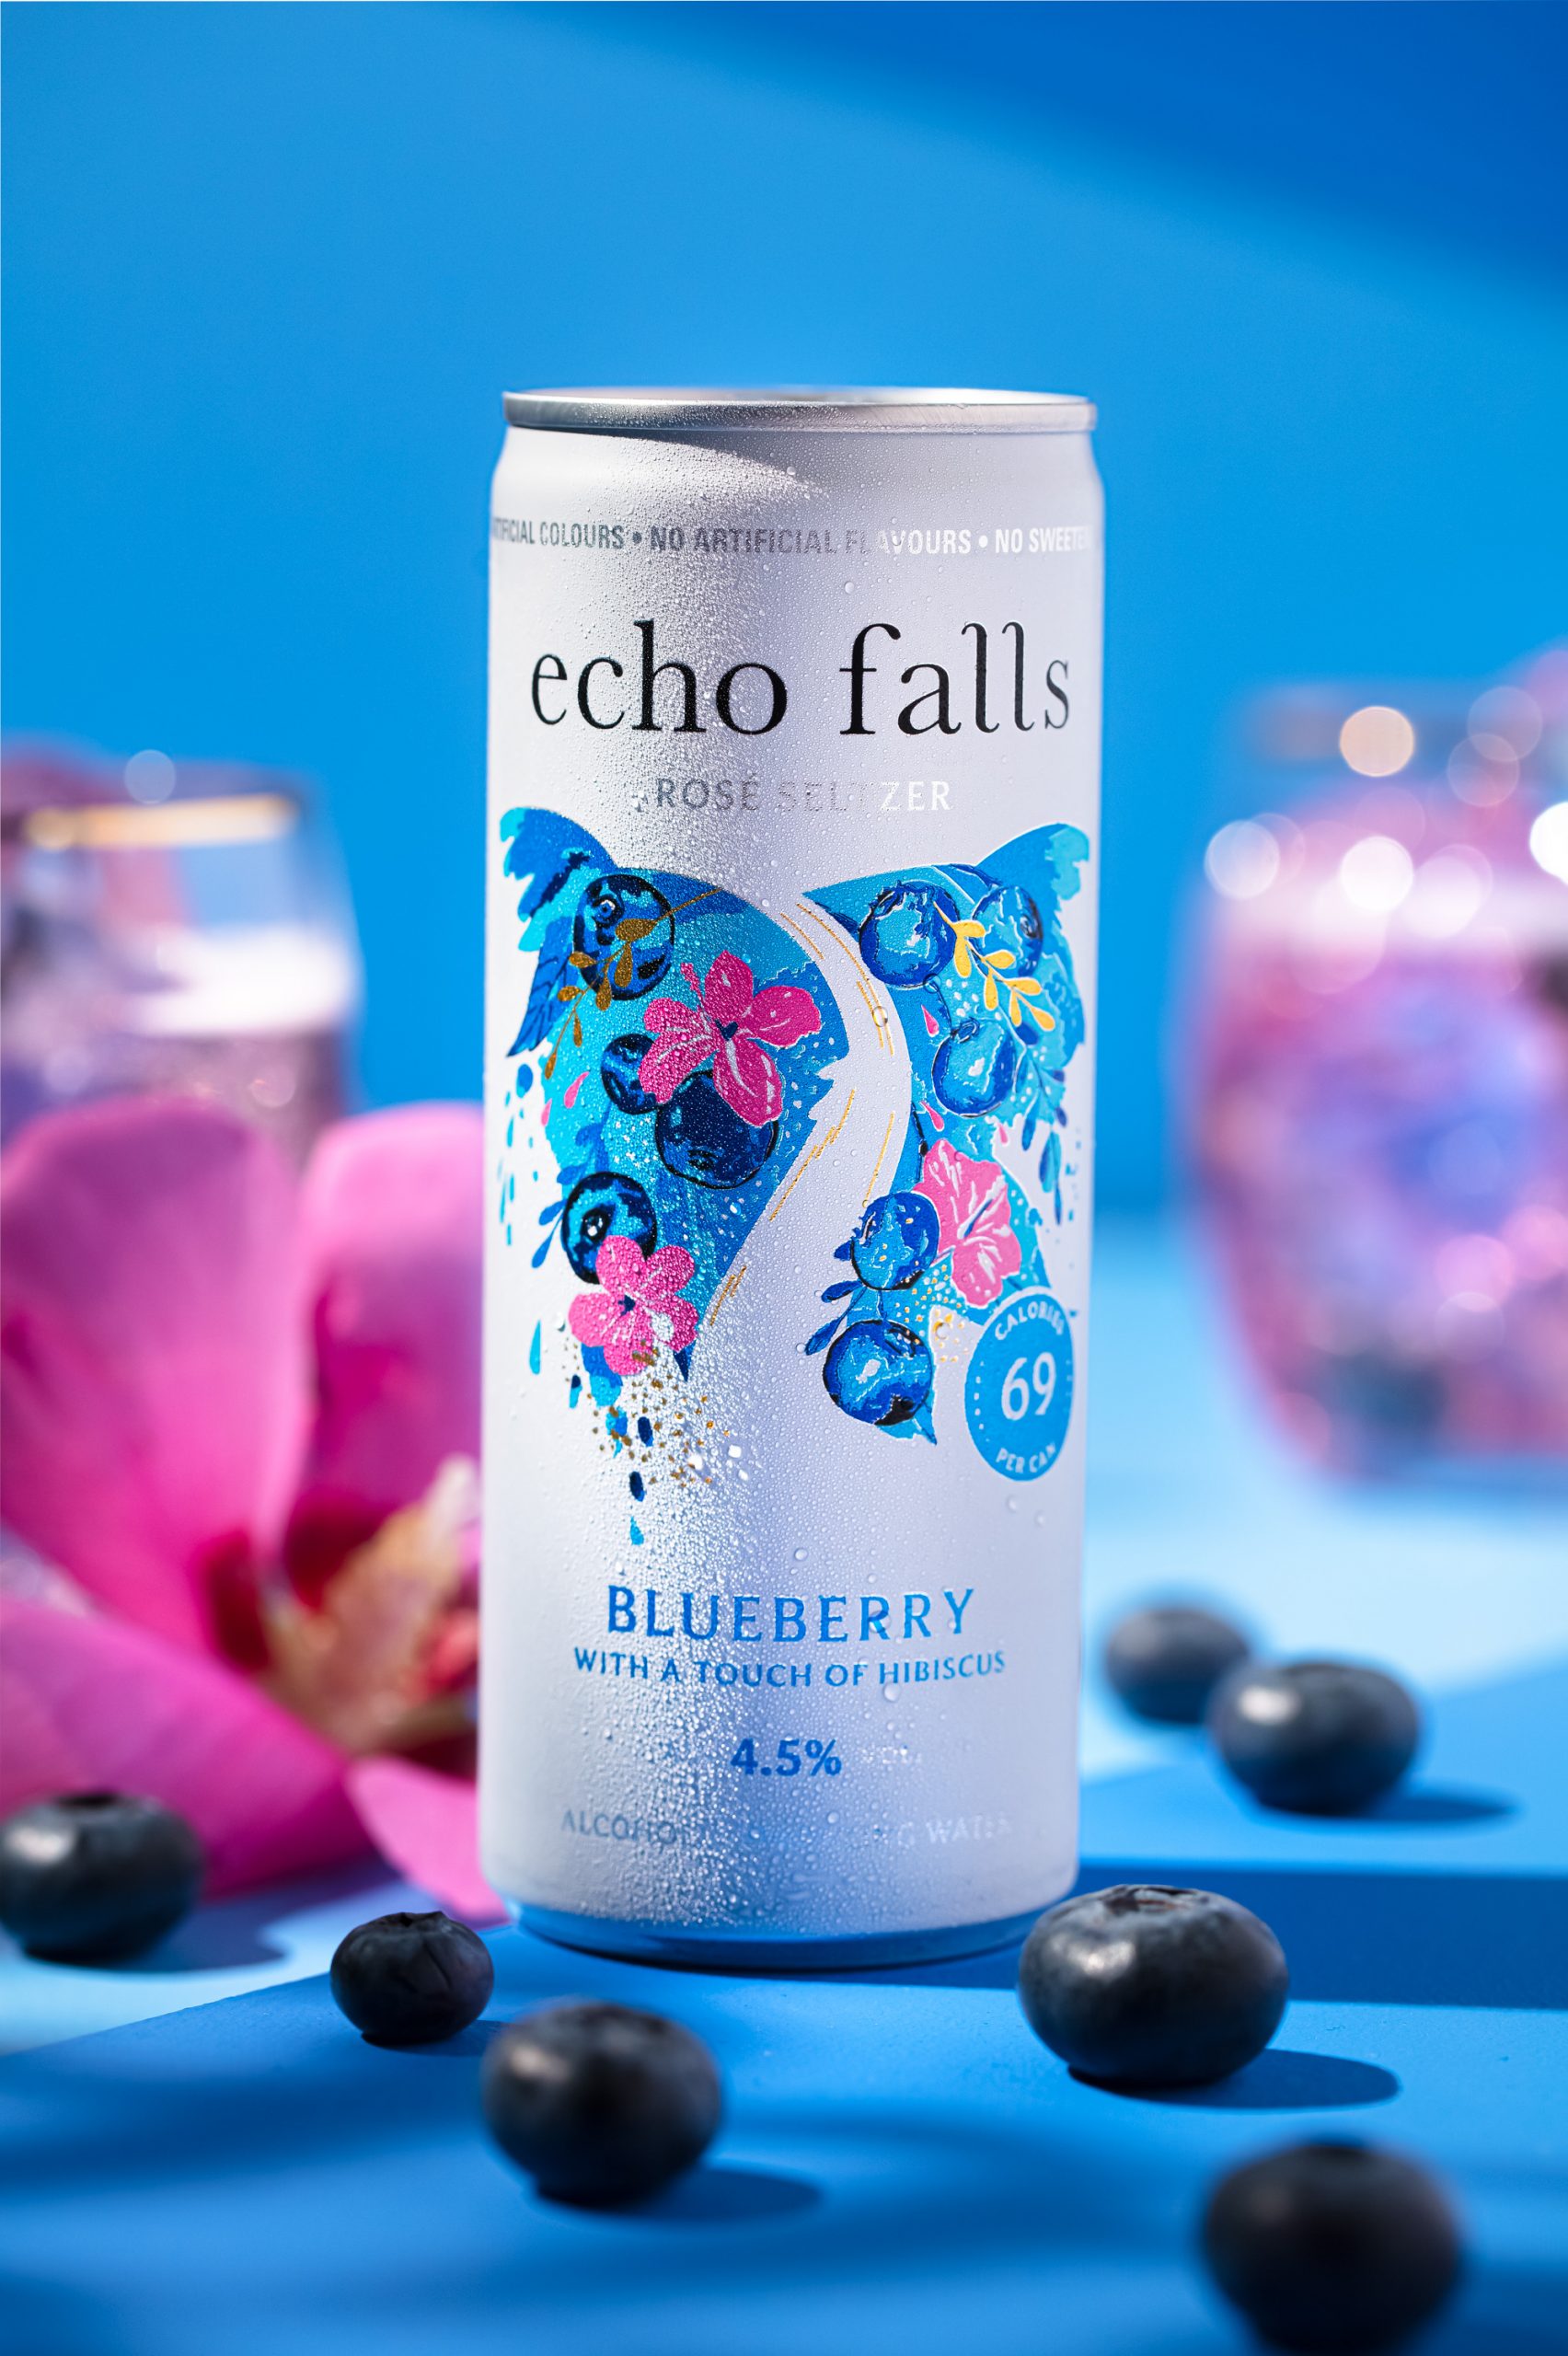 Echo Falls Blueberry & Hibiscus Rosé Seltzer named “Product of The Year”